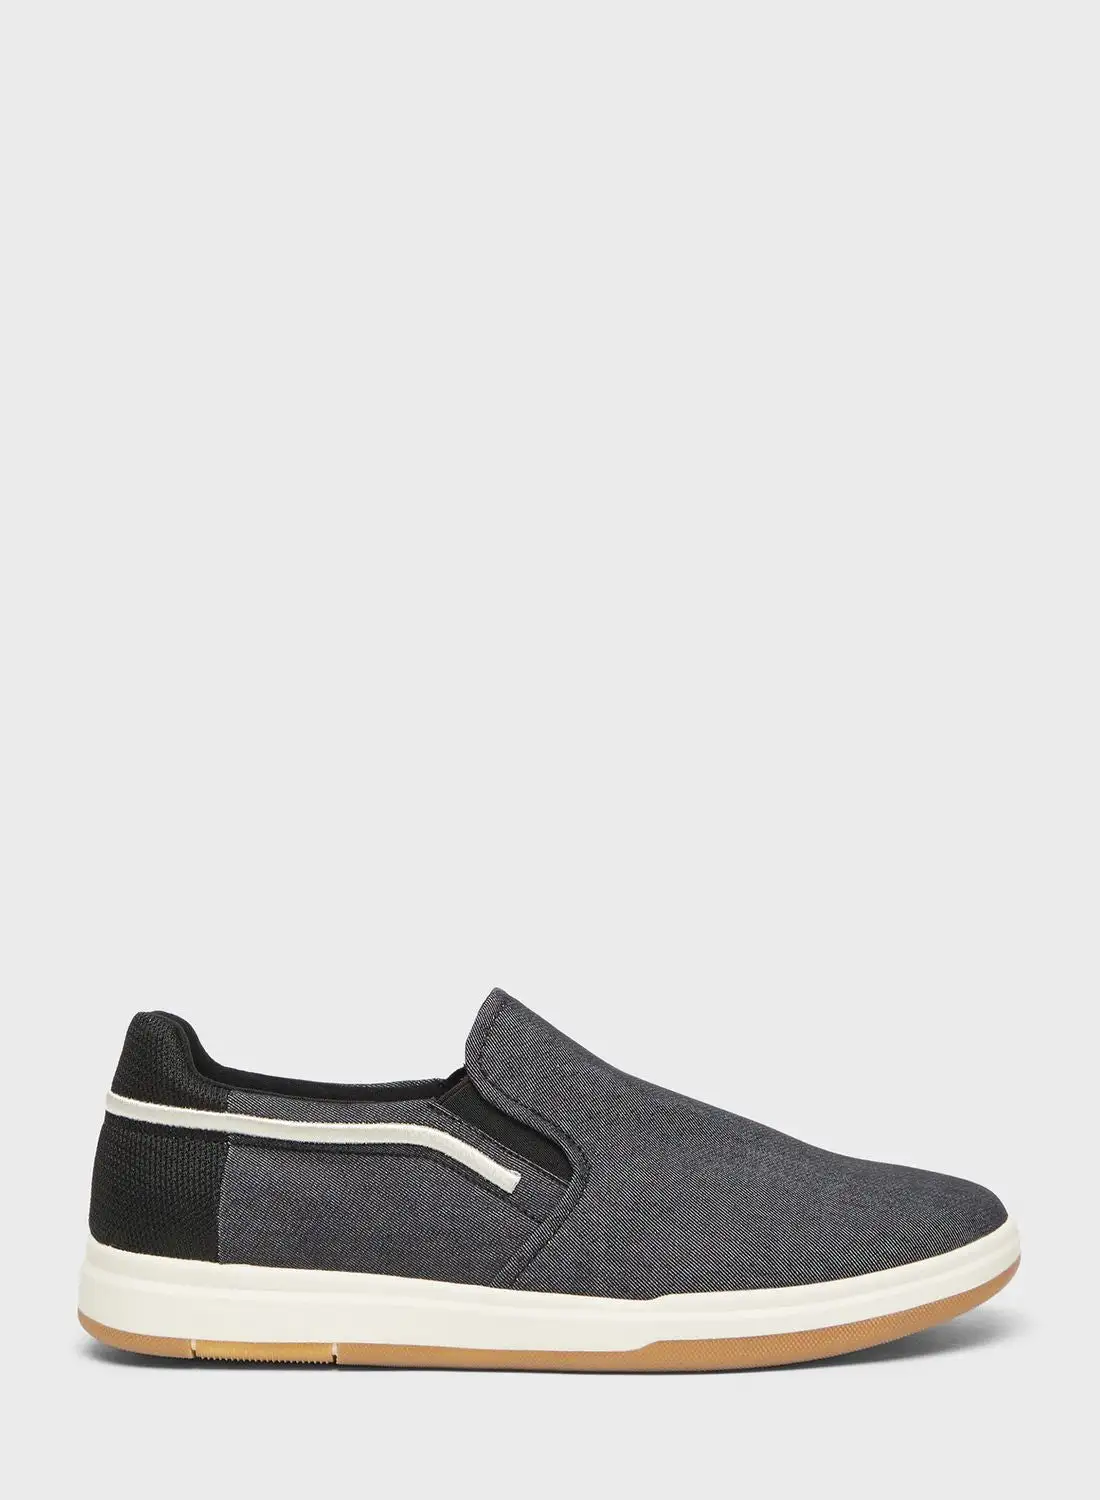 Lee Cooper Casual Slip Ons Shoes